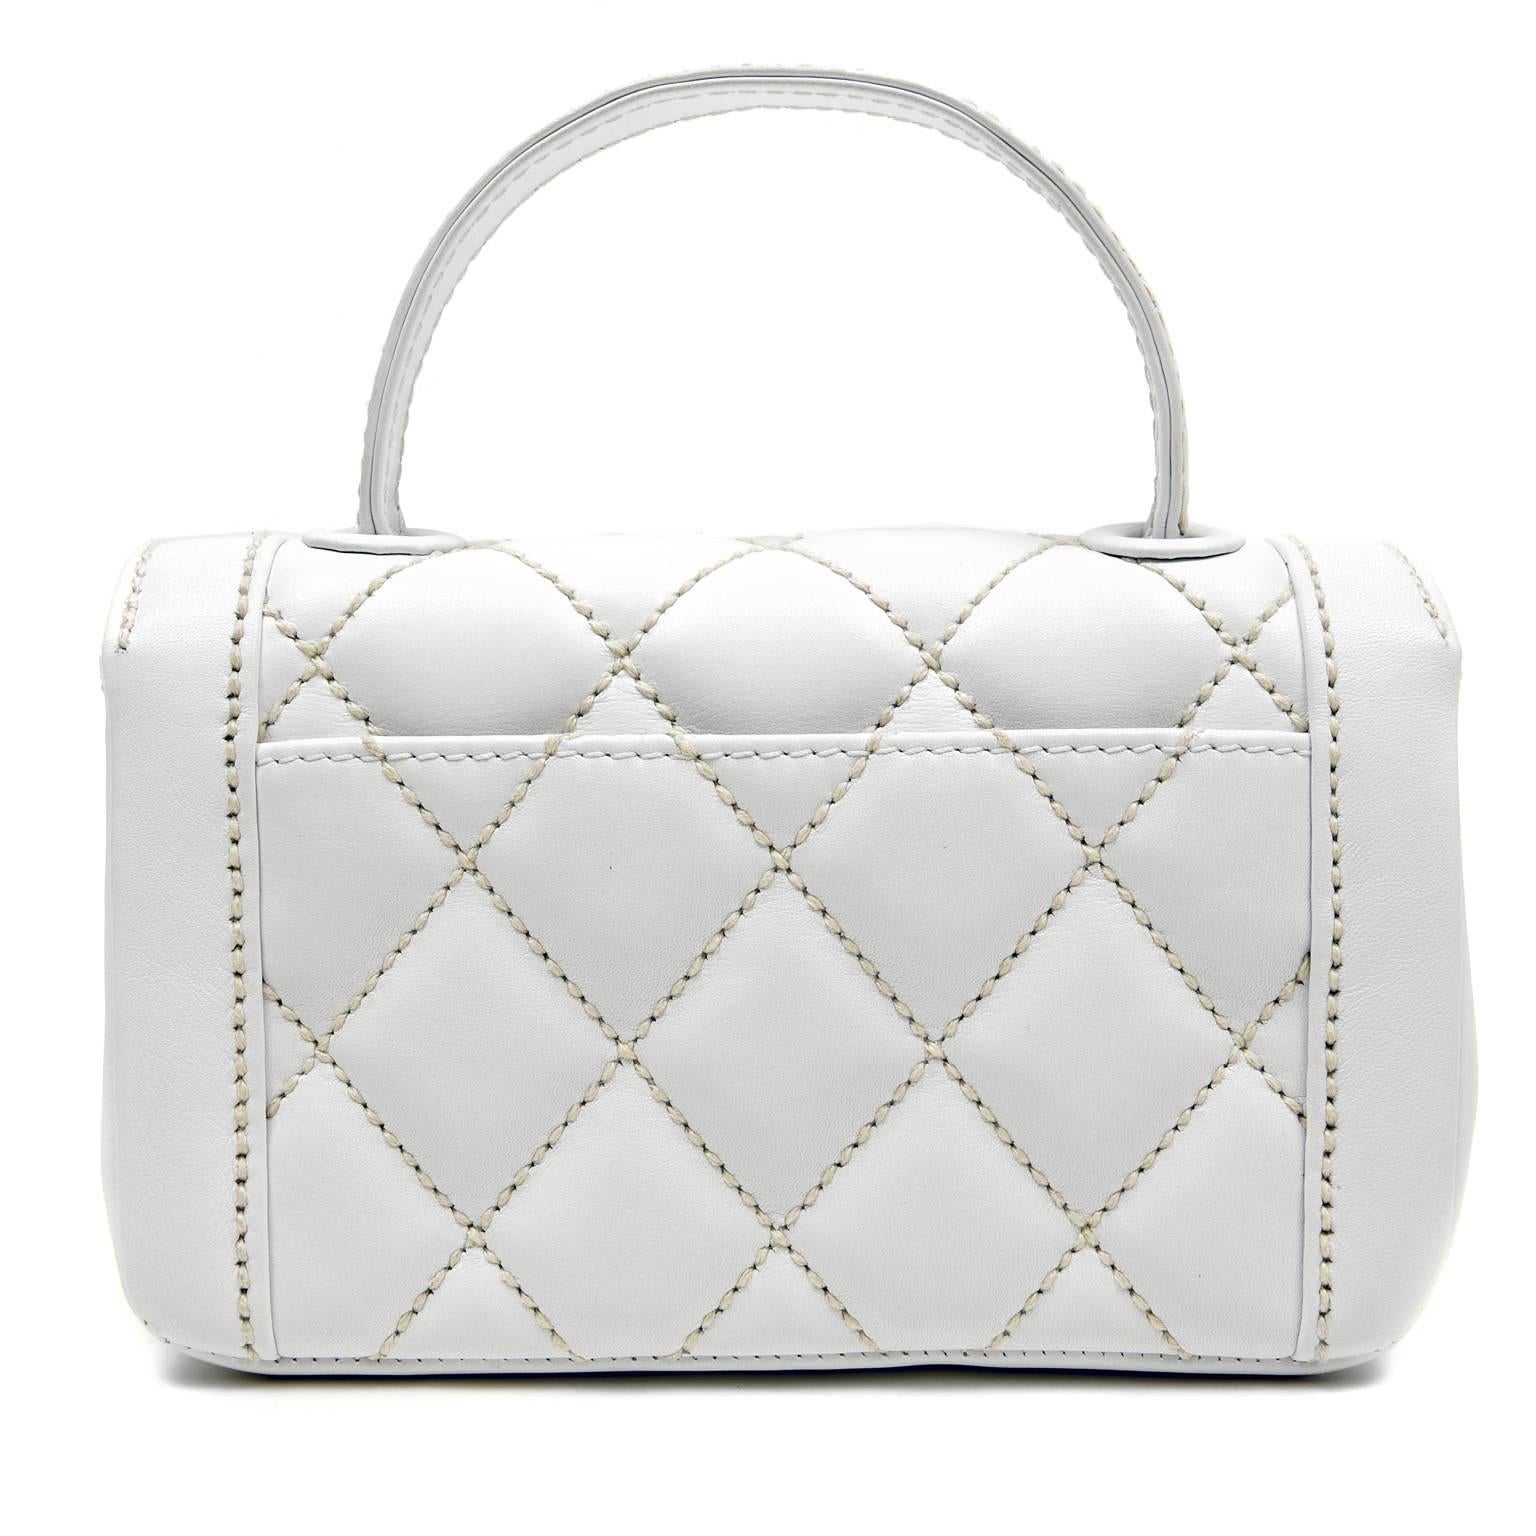 Chanel White Leather Mini Kelly Classic -PRISTINE
 Petite and demure, this piece epitomizes the ultimate Chanel for luncheons and a day of shopping.

White leather is top stitched with creamy contrasting diamond stitching.  Gold tone interlocking